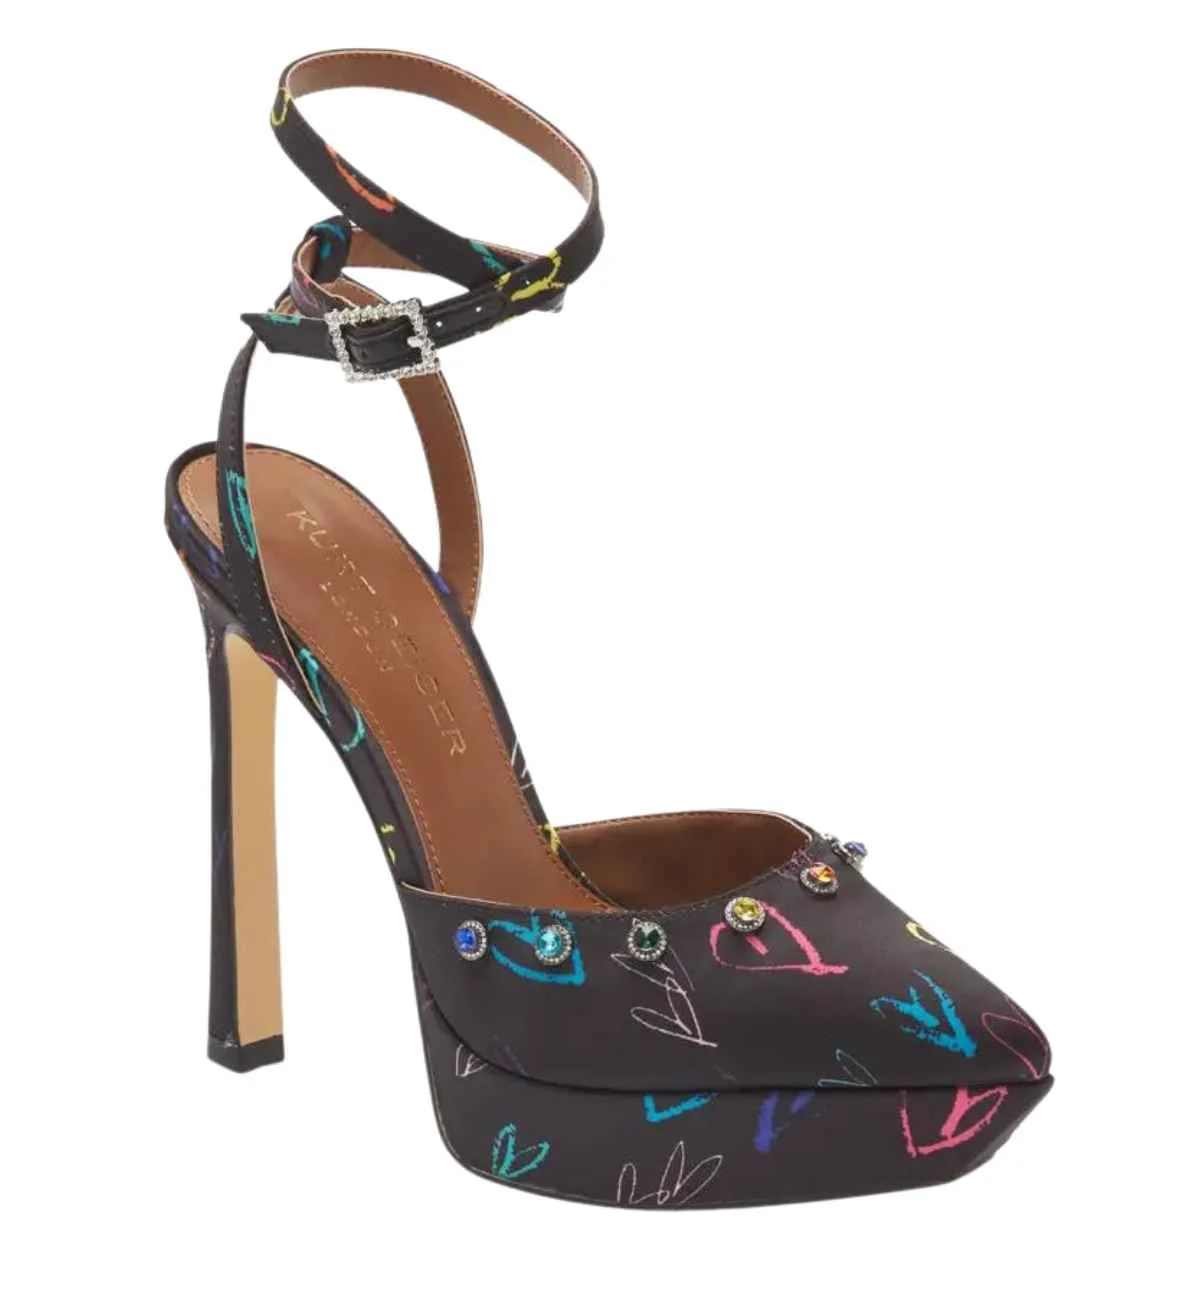 Strappy black heart heel with multicoloured heart pattern all over on white background.